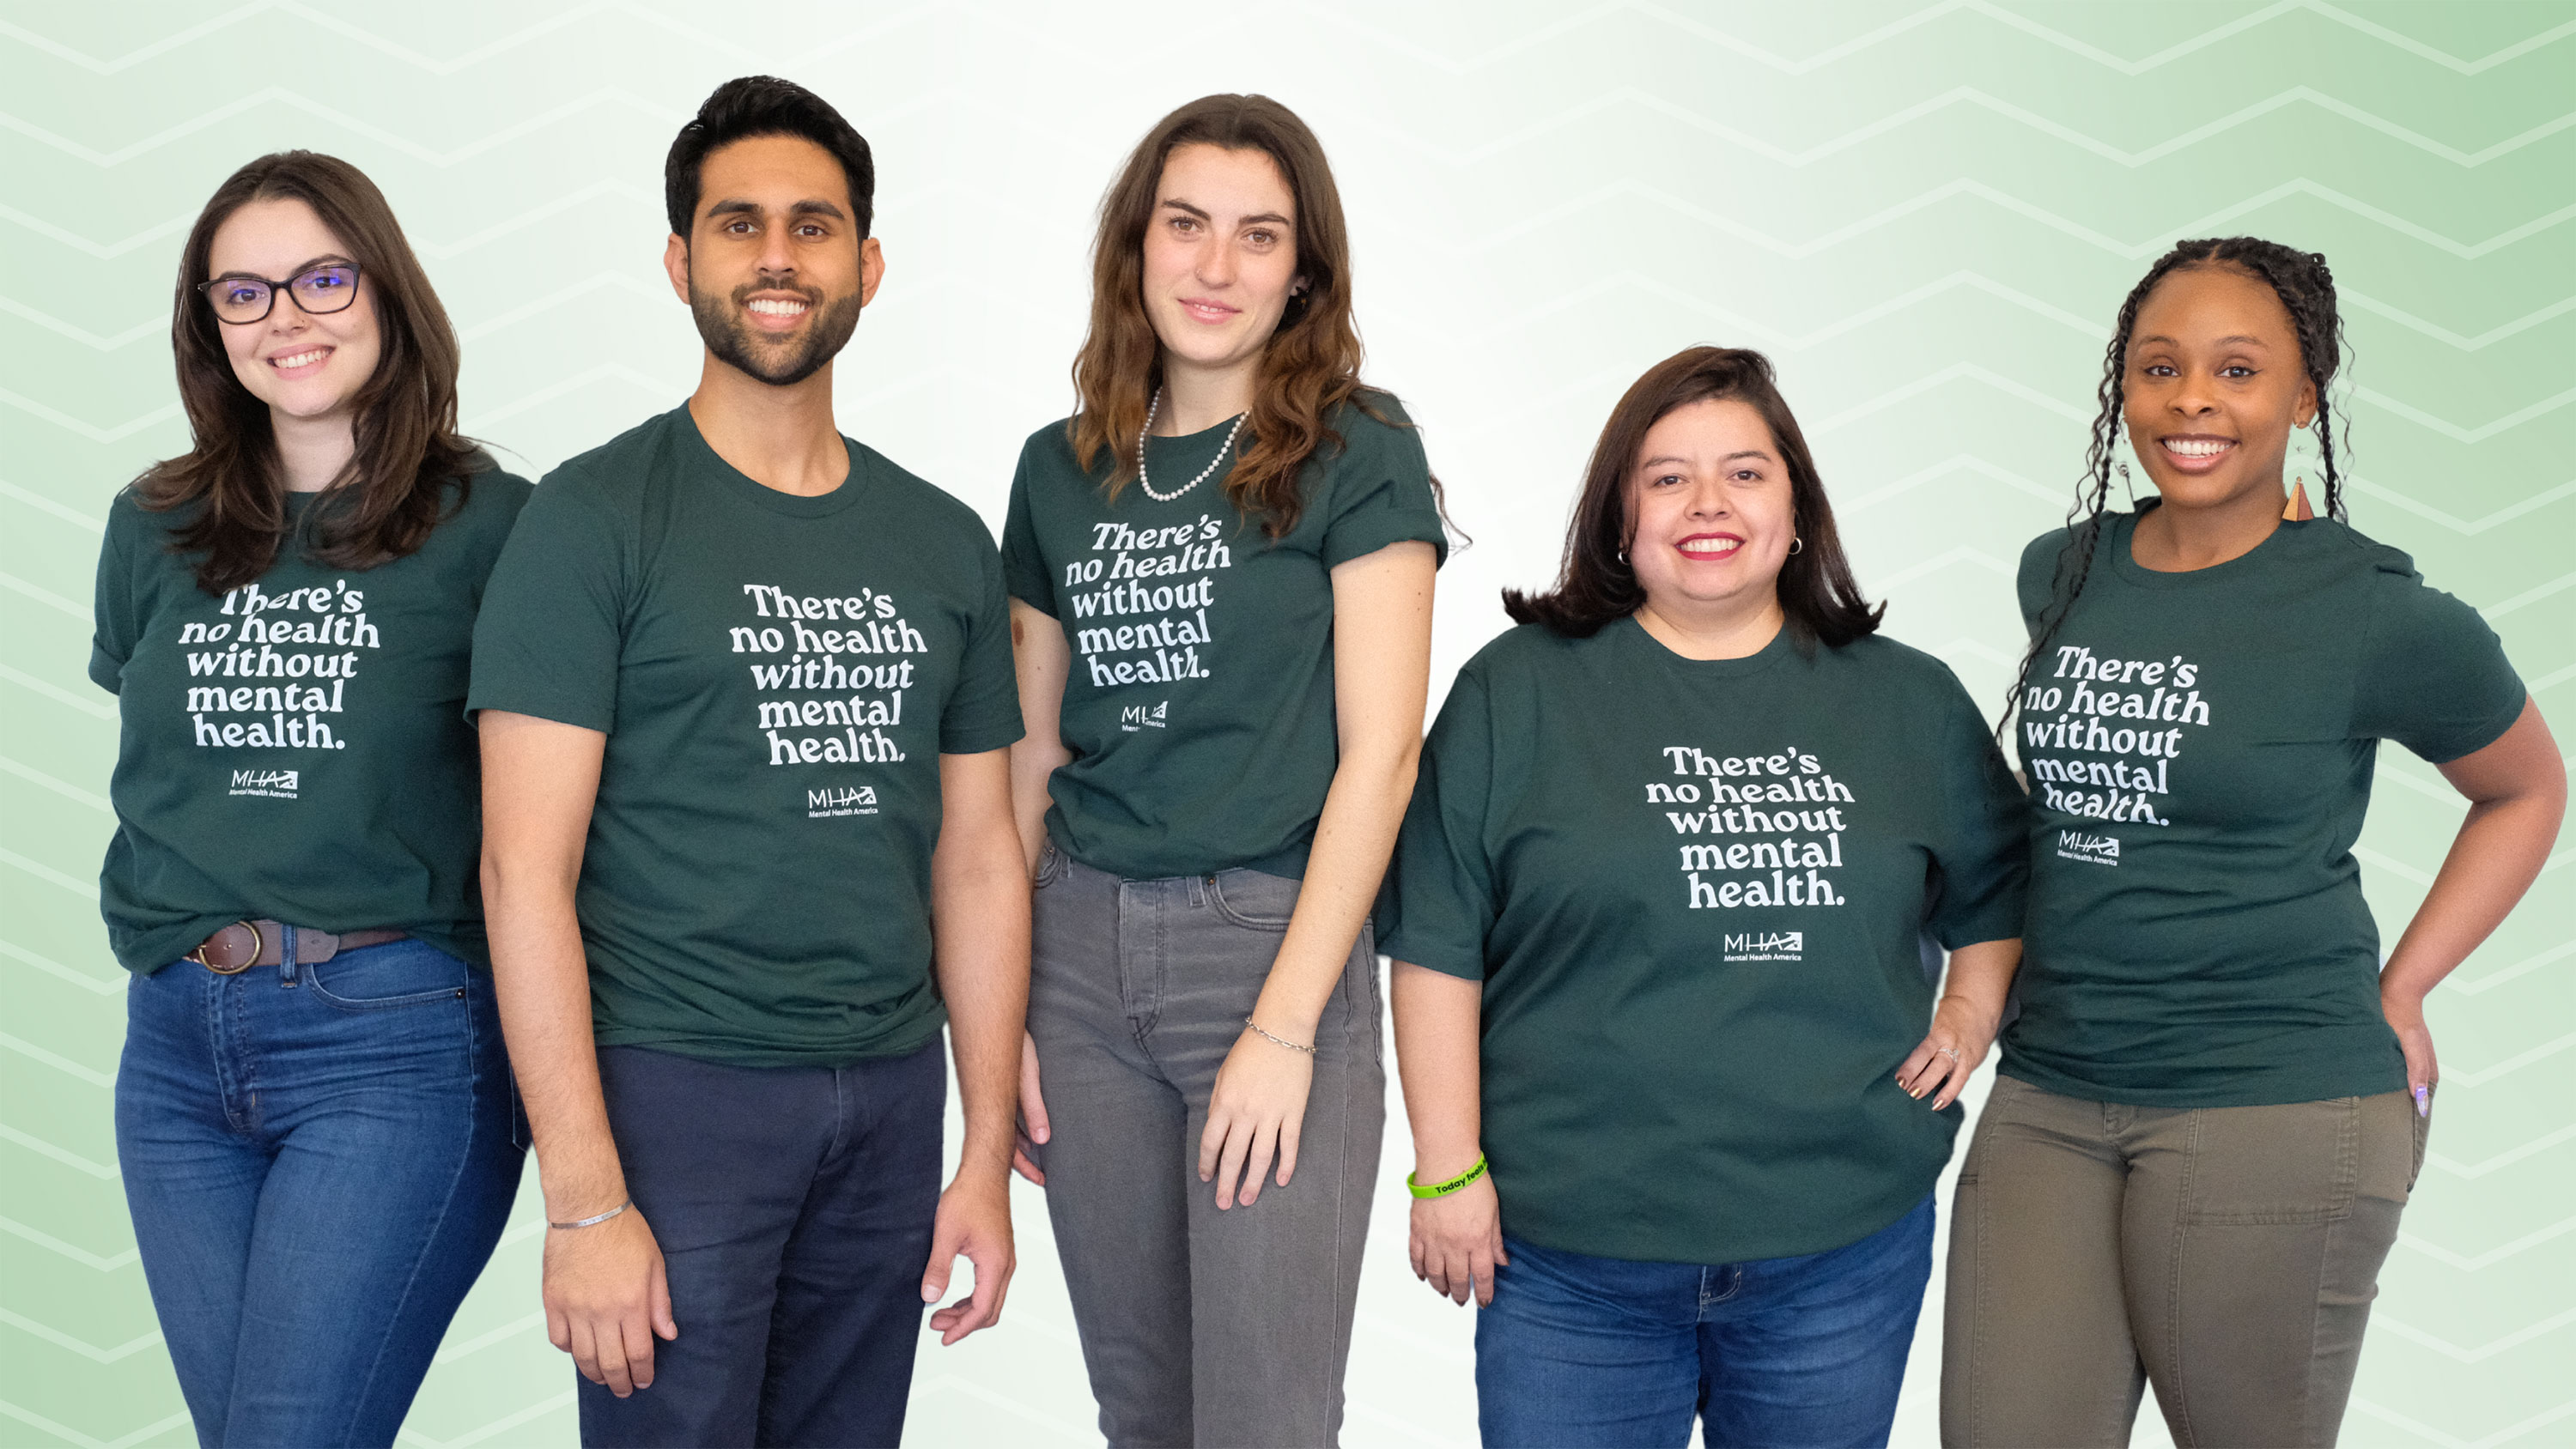 5 people wearing a green shirt that says There's no health without mental health